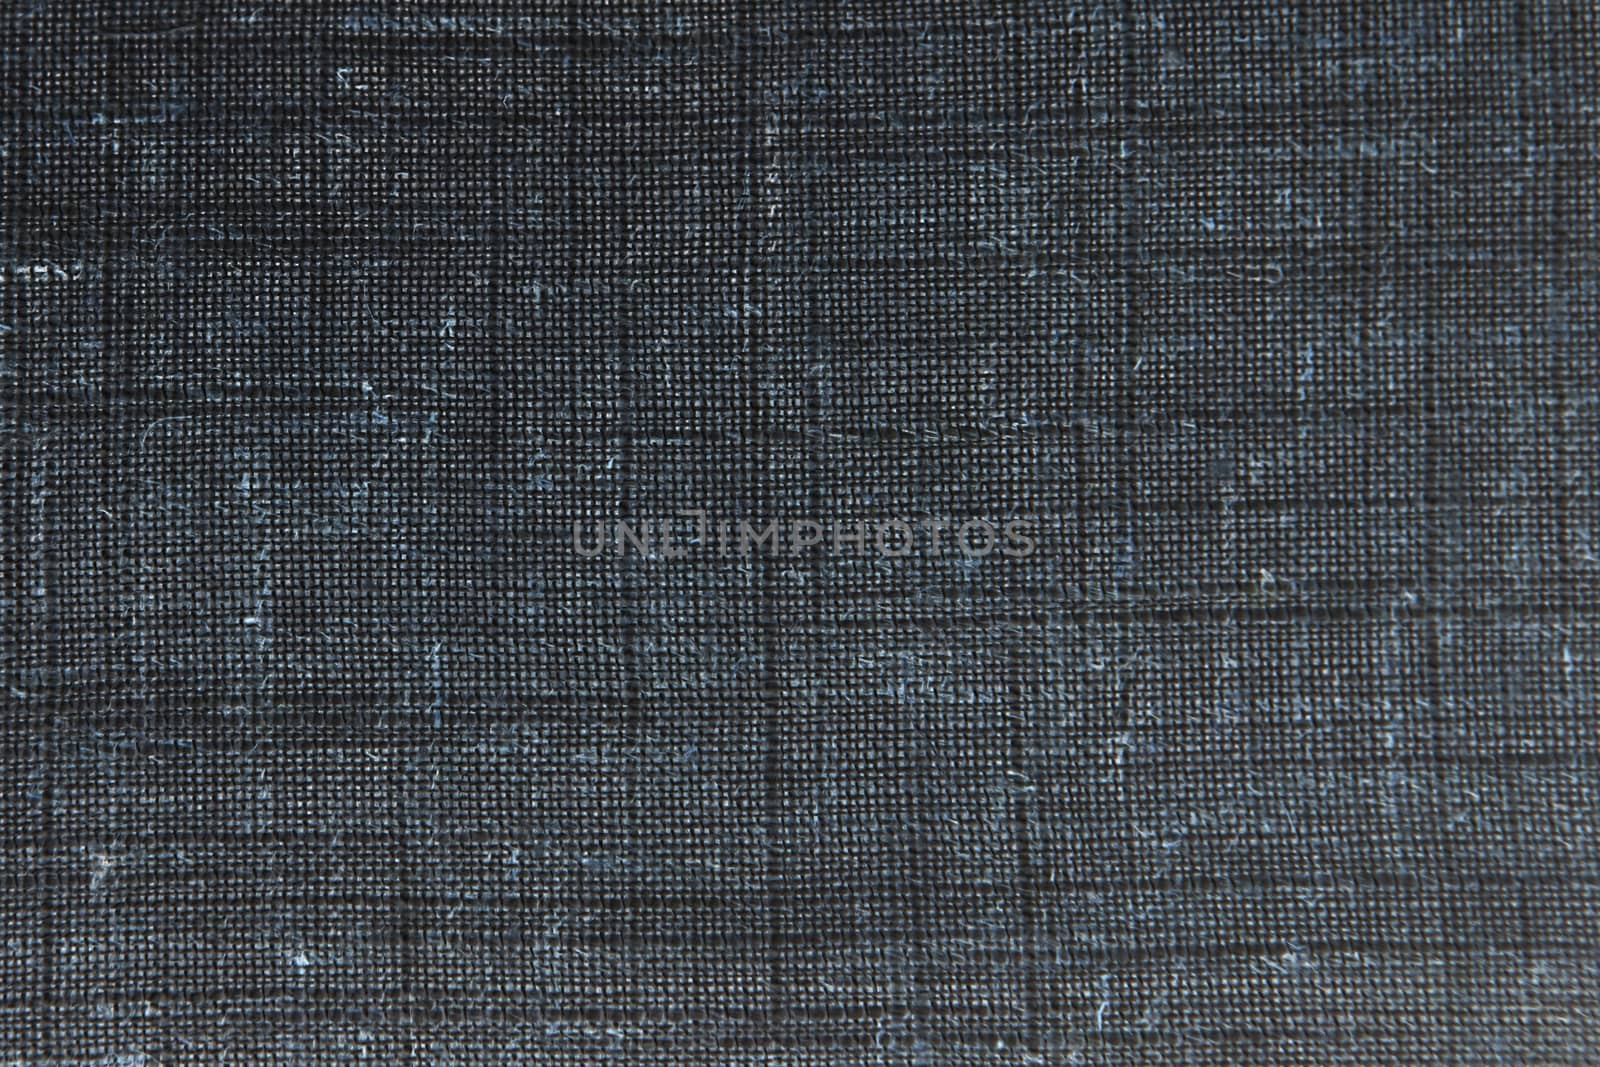 Detailed Closeup vintage old textured fabric burlap, rustic background in black, grey. Canvas Macro Pattern. Natural Light Linen Texture.